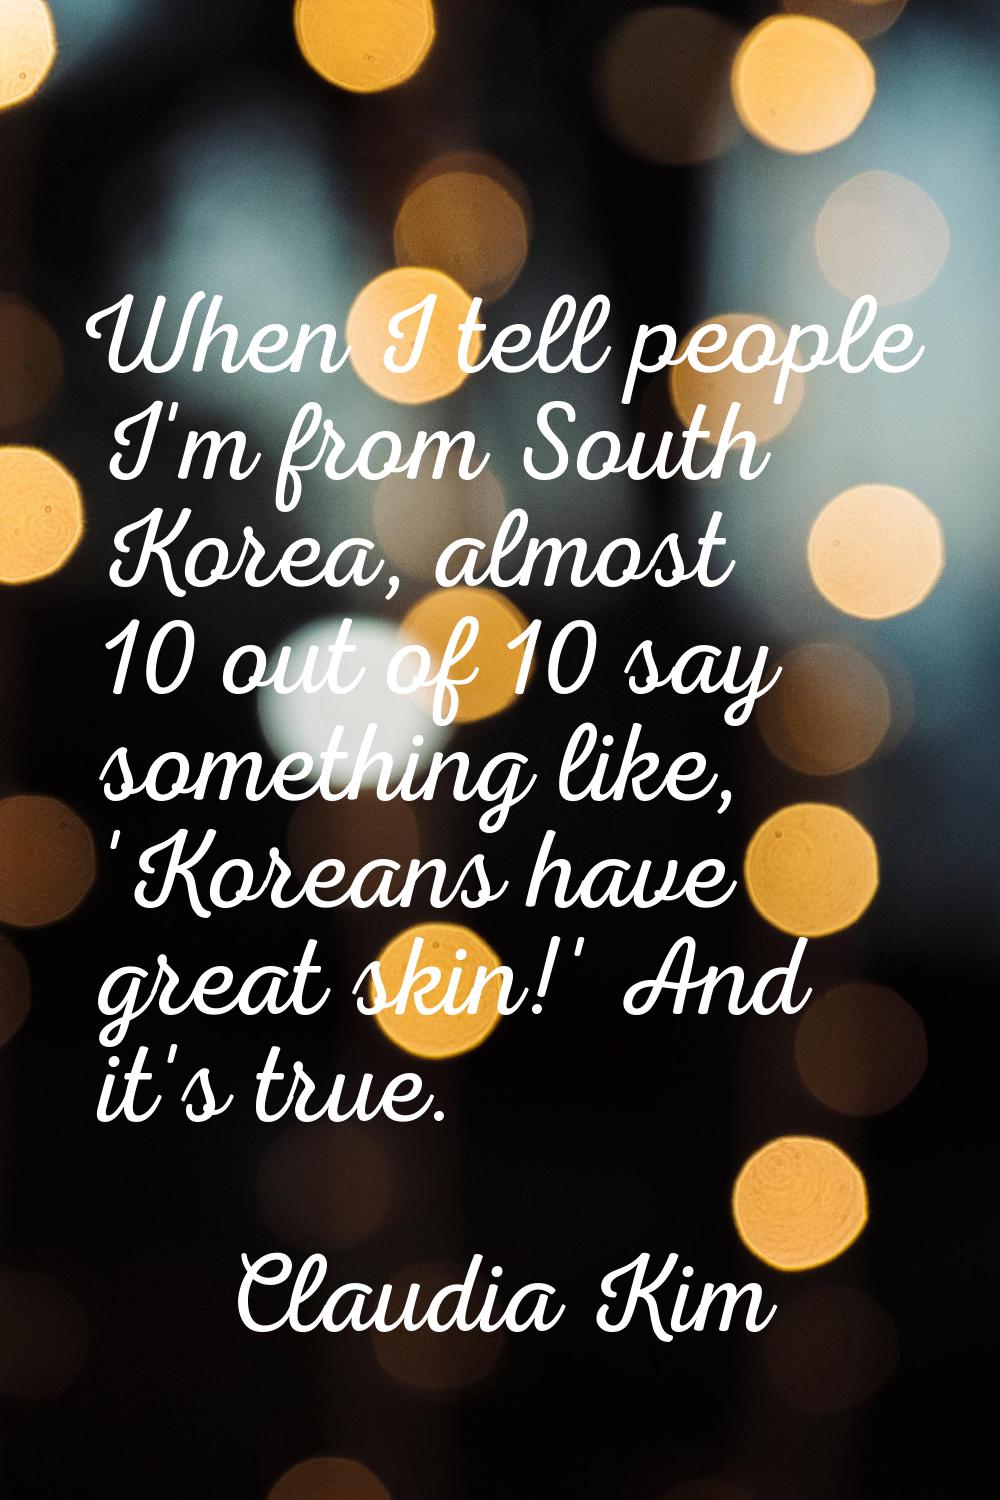 When I tell people I'm from South Korea, almost 10 out of 10 say something like, 'Koreans have grea